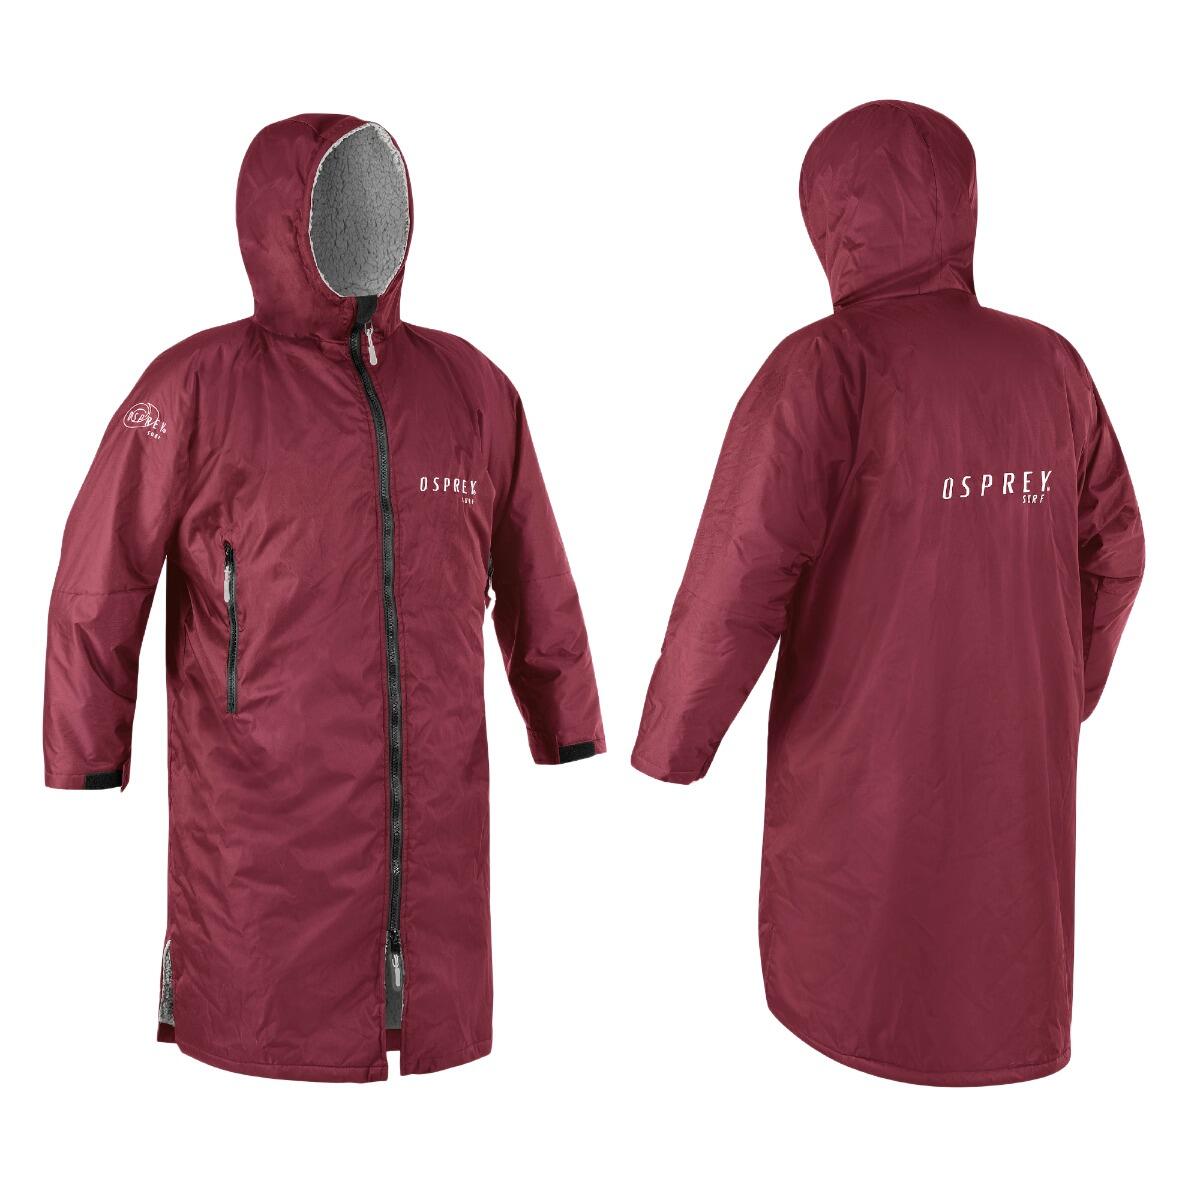 Osprey Adult Changing Robe, Waterproof Changing Robe Maroon 1/4